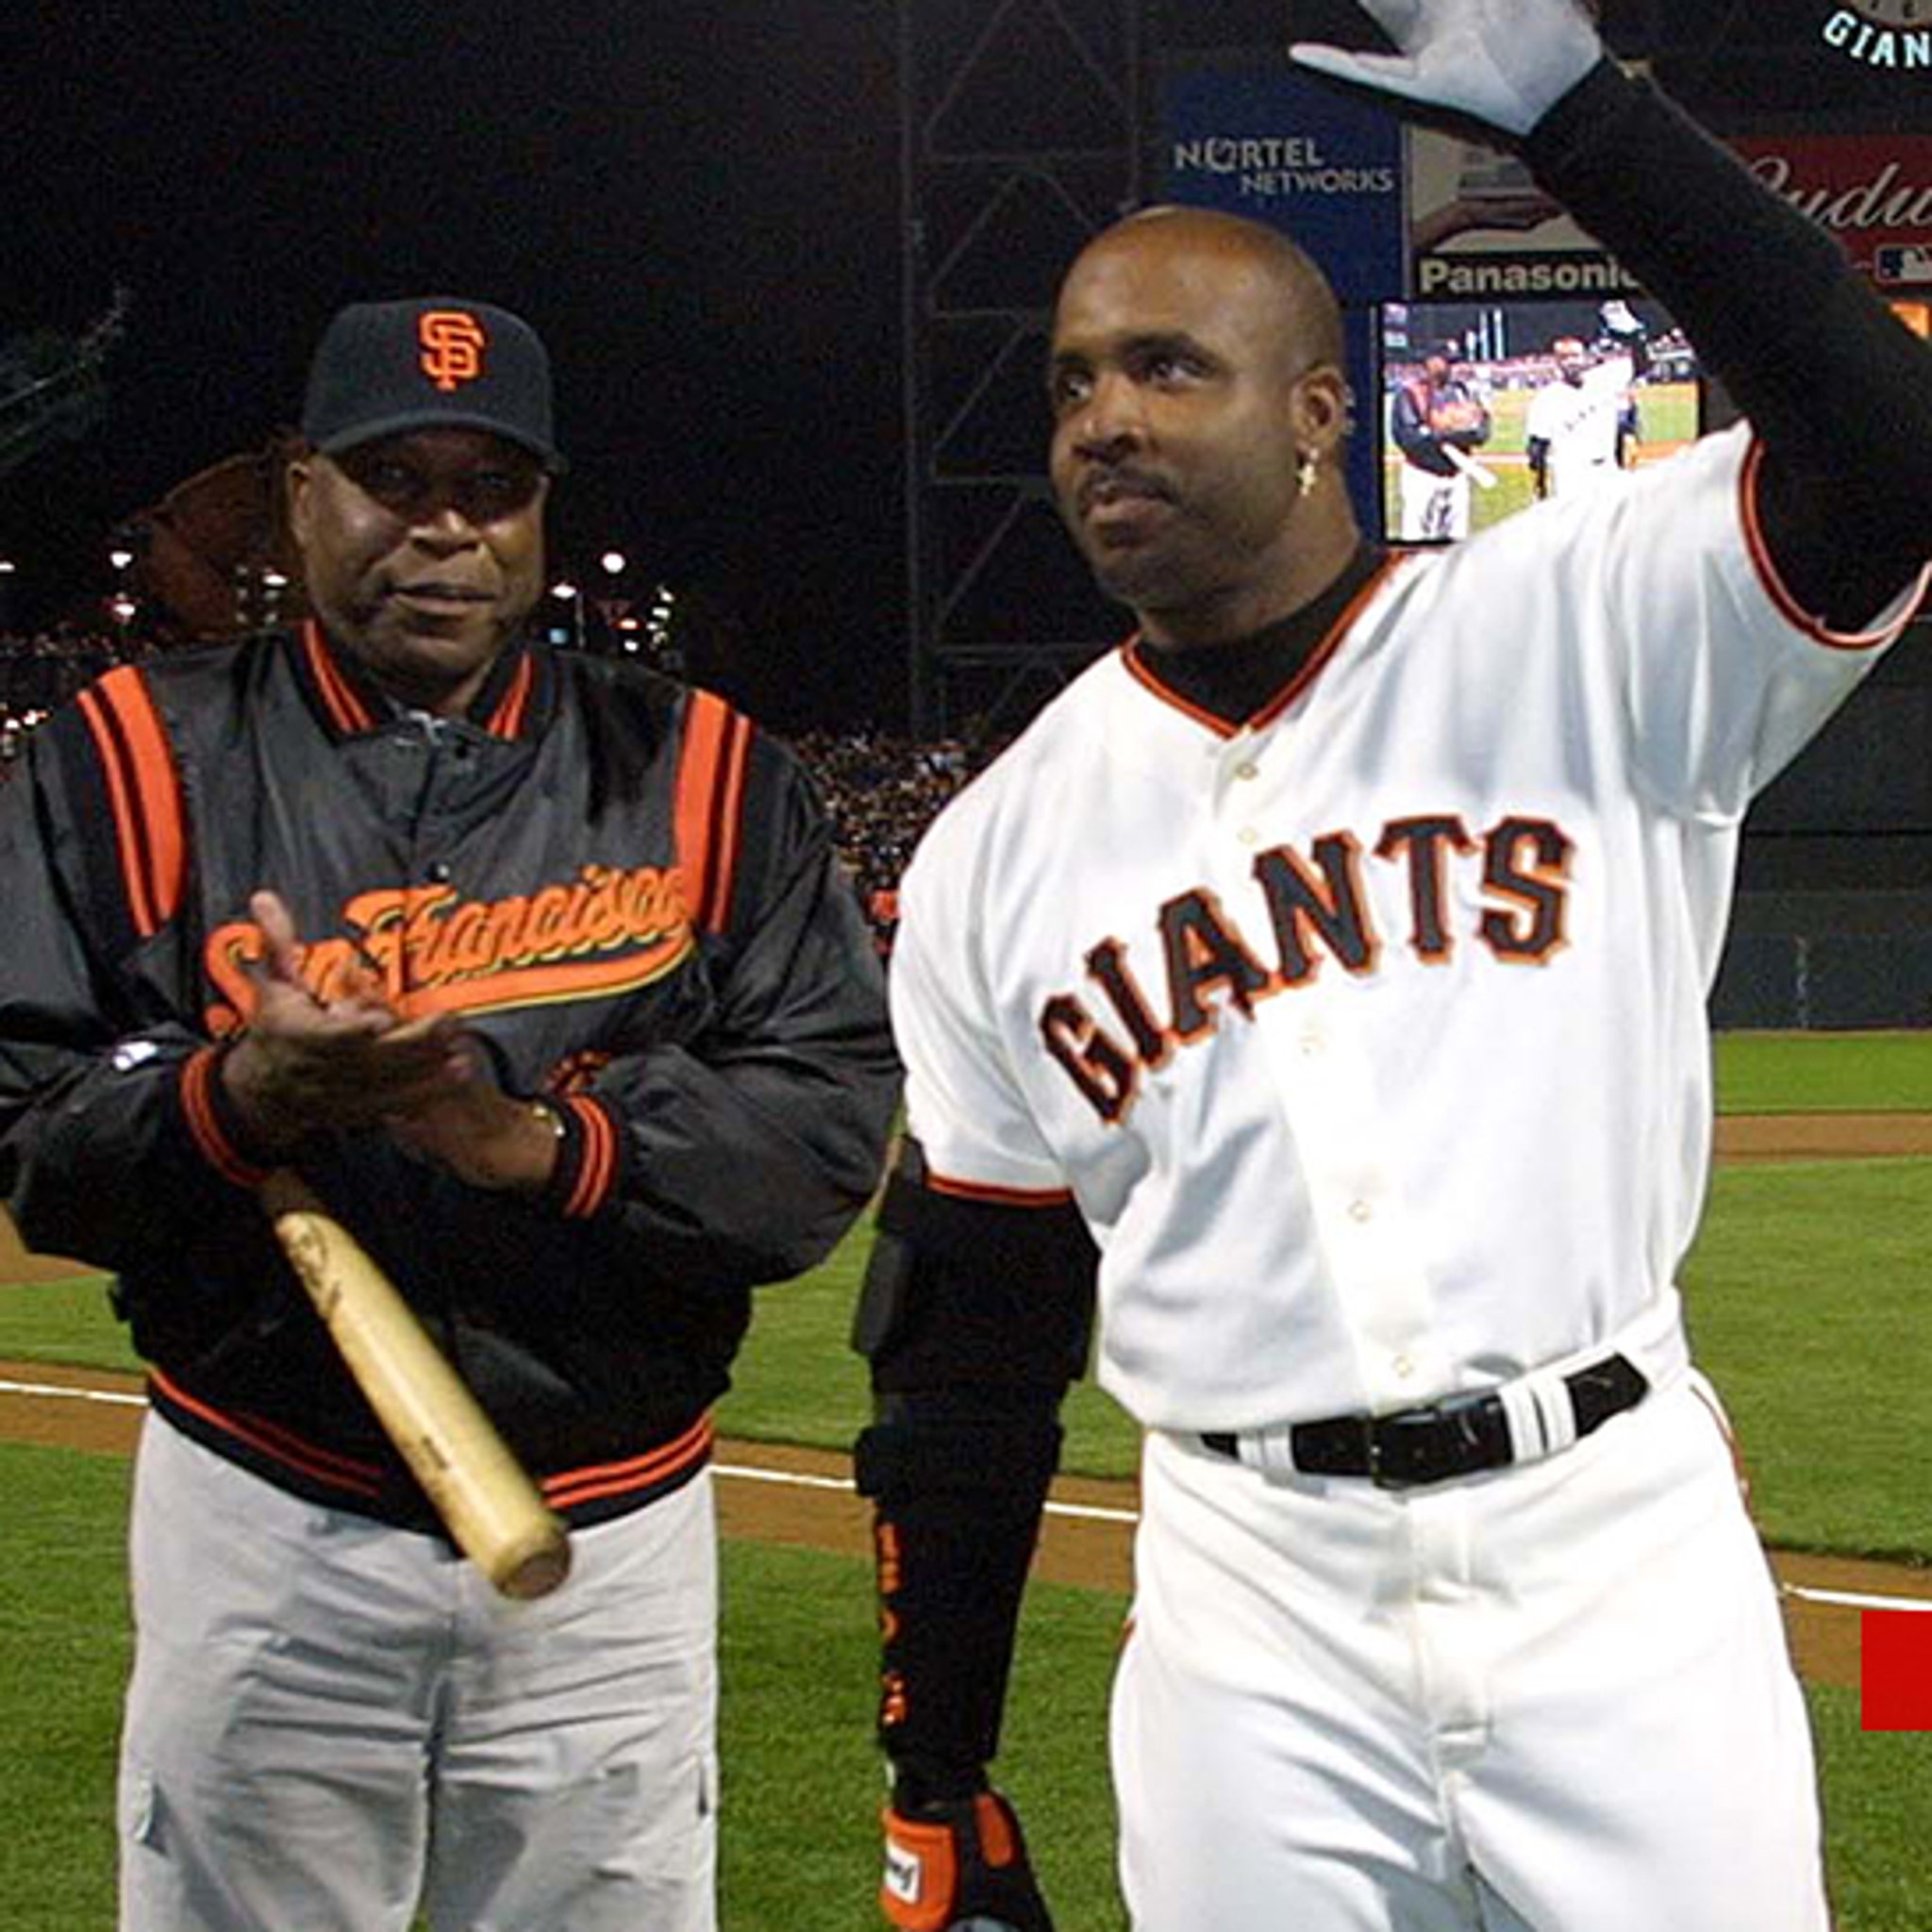 Barry Bonds 'Crying' Over Death of Willie McCovey